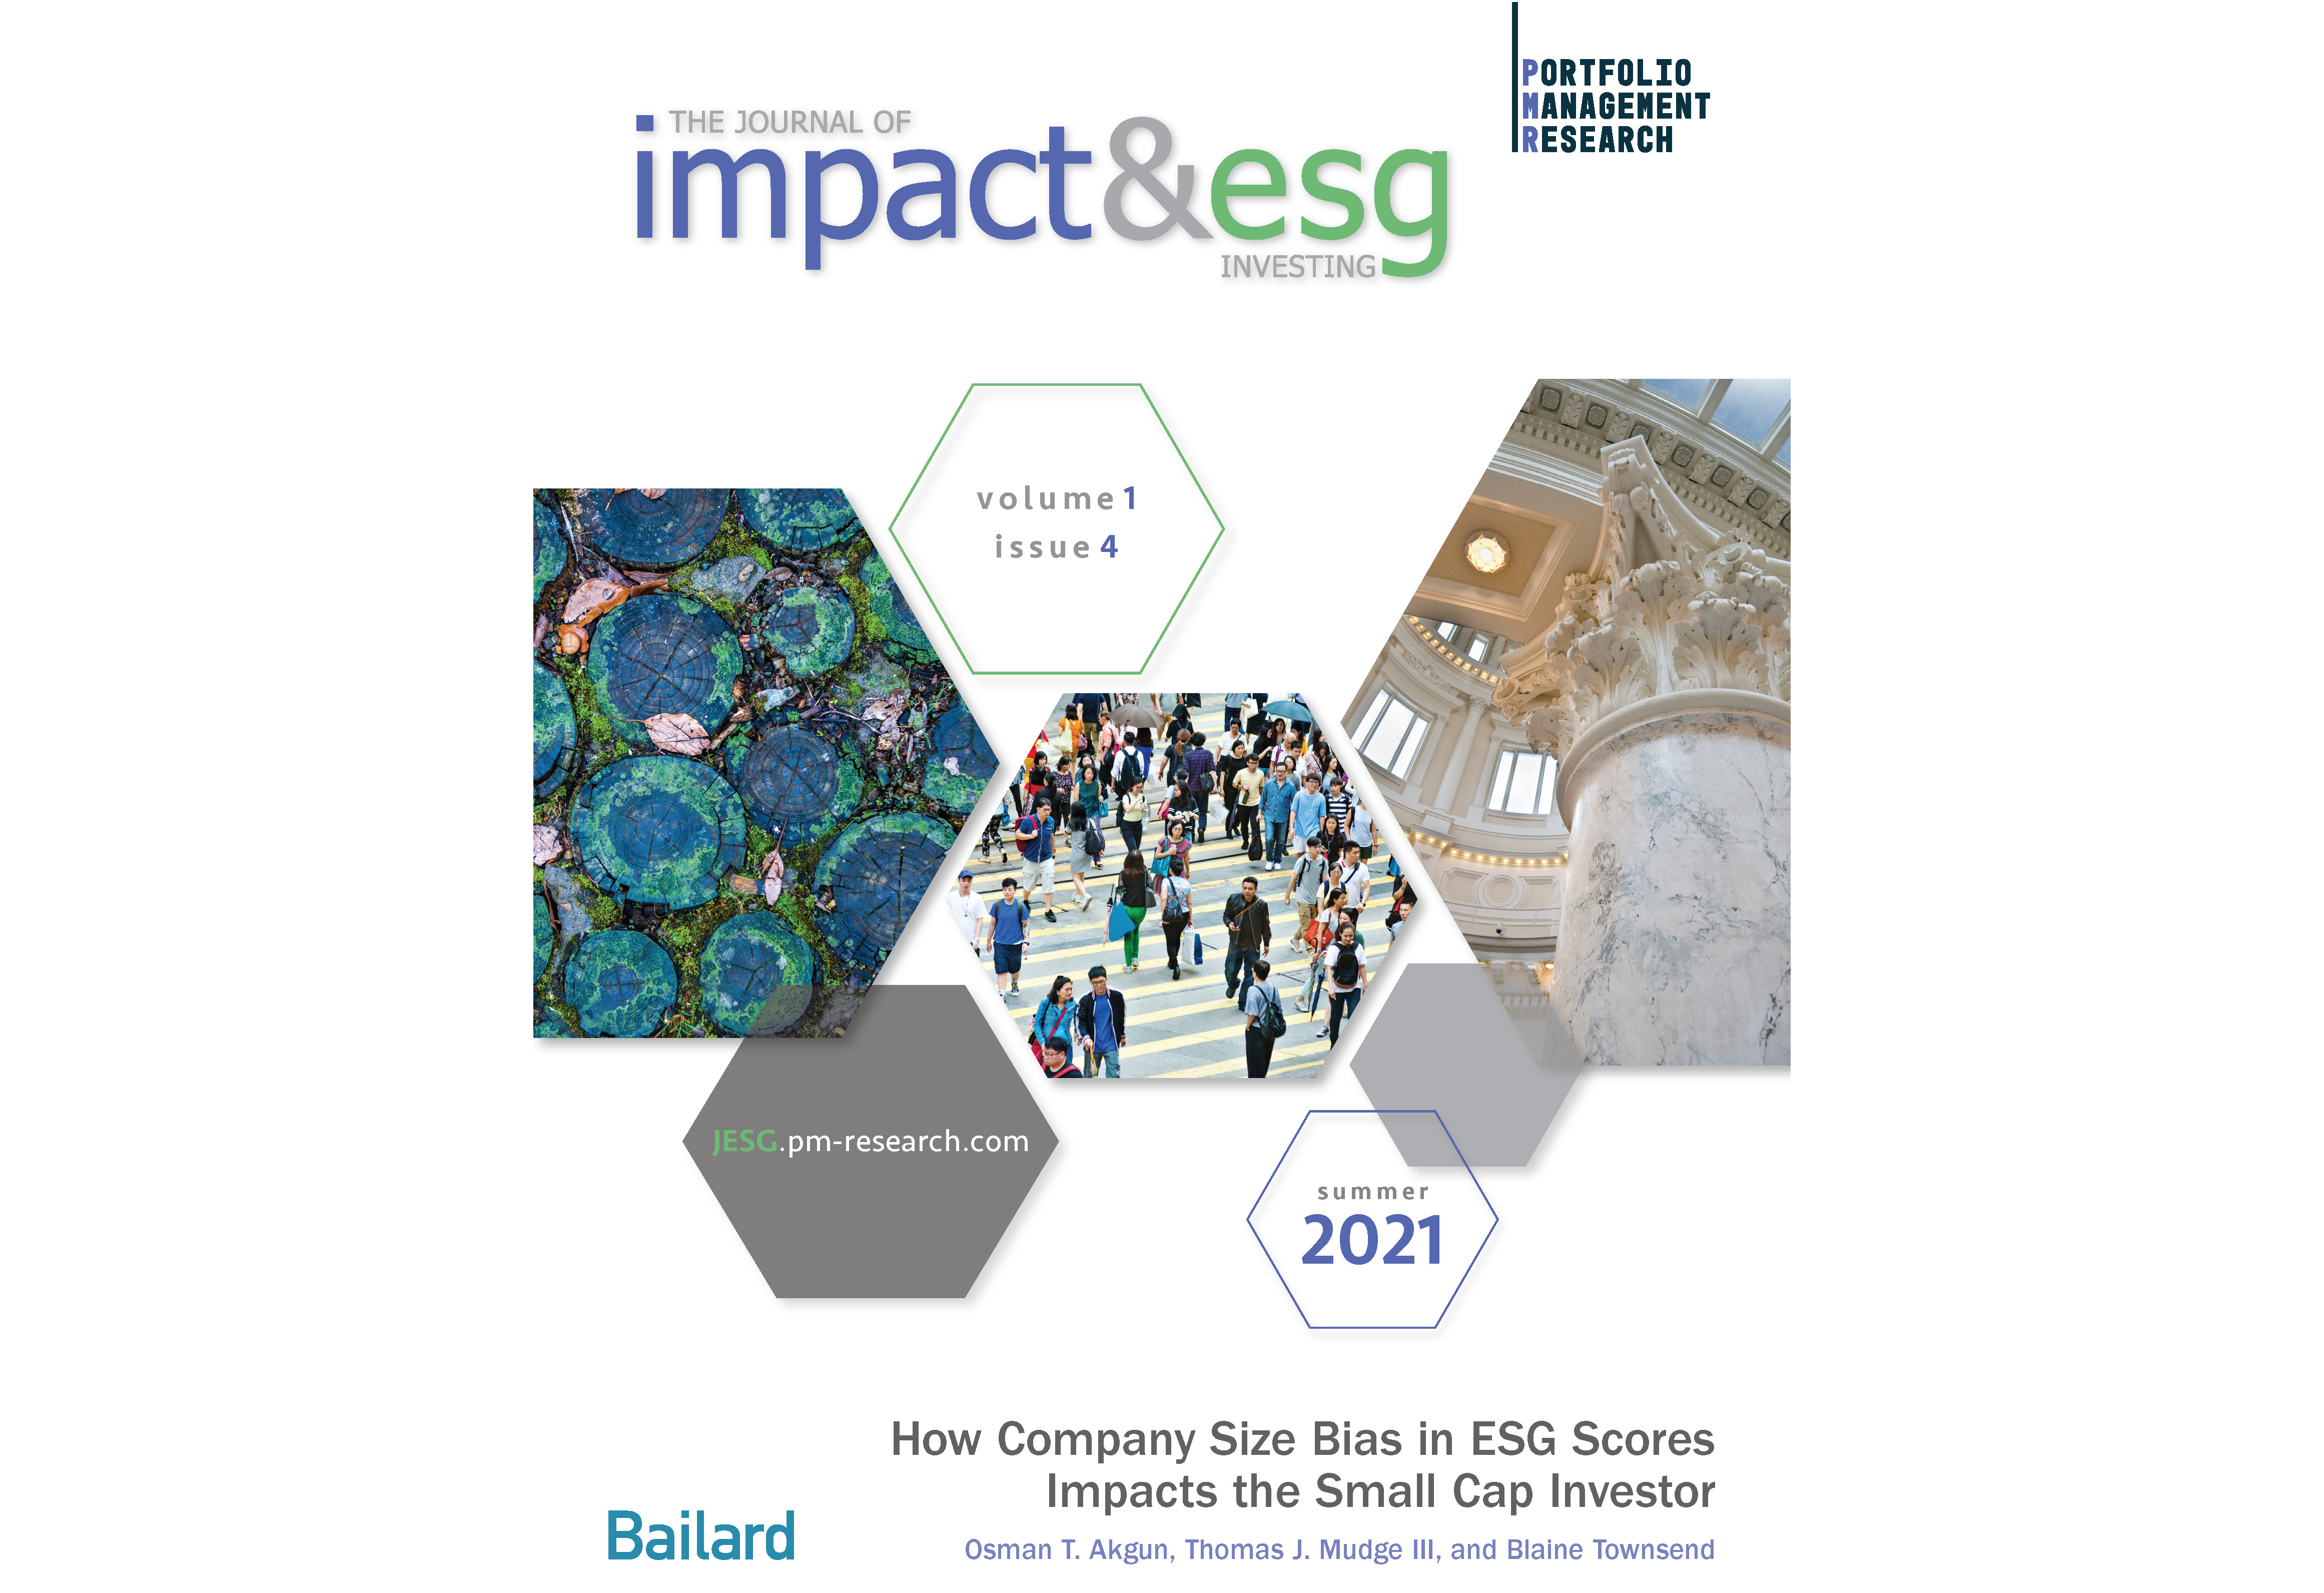 Journal of impact and esg investing cover summer 2021 hexagon shapes with images of people and columns and issue dates